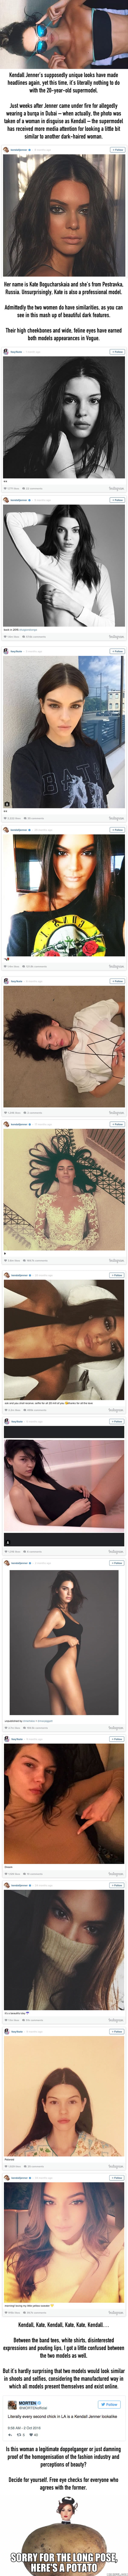 This Kendall Jenner Lookalike Has Befuddled The Fashion Industry